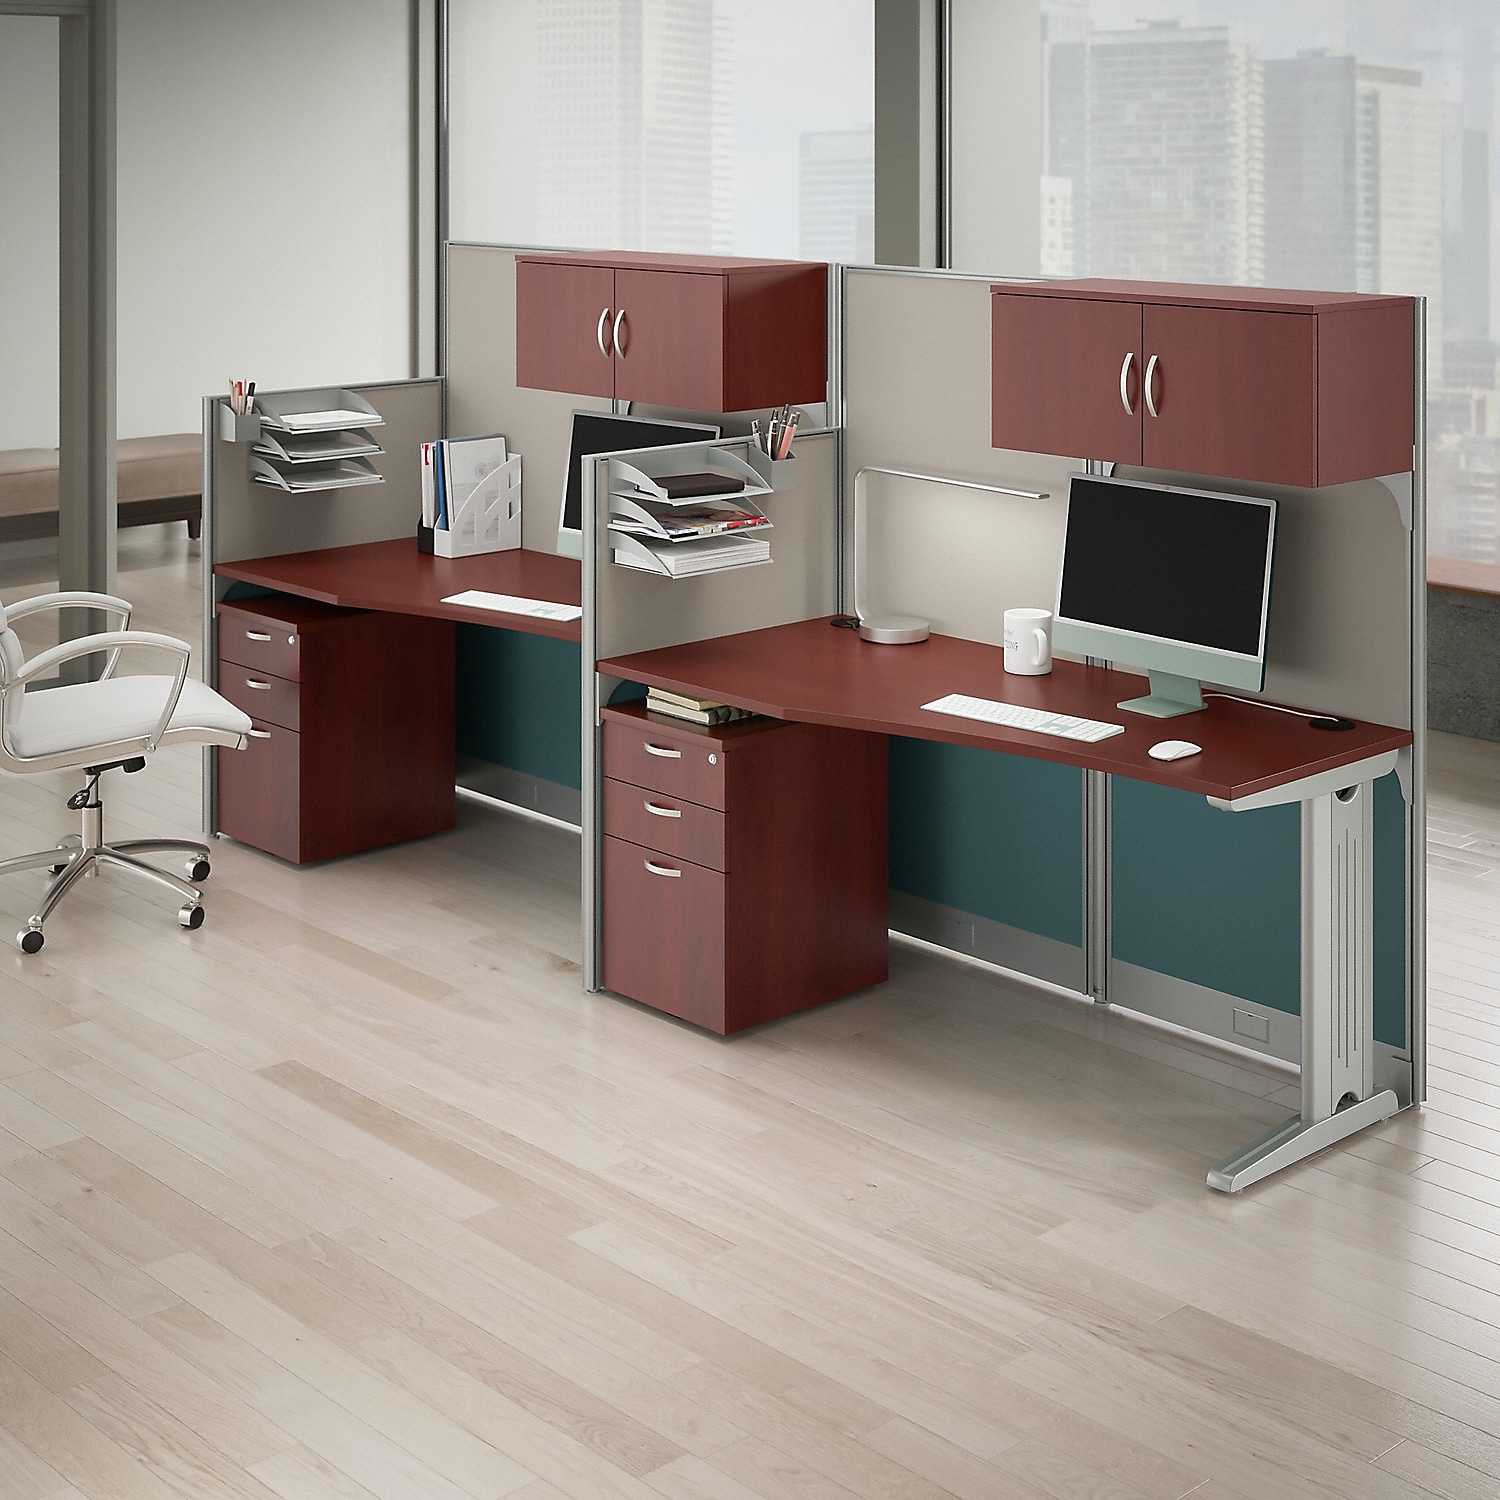 Office in an Hour Cubicle Desk with Storage in Hansen Cherry - Engineered Wood - image 6 of 9